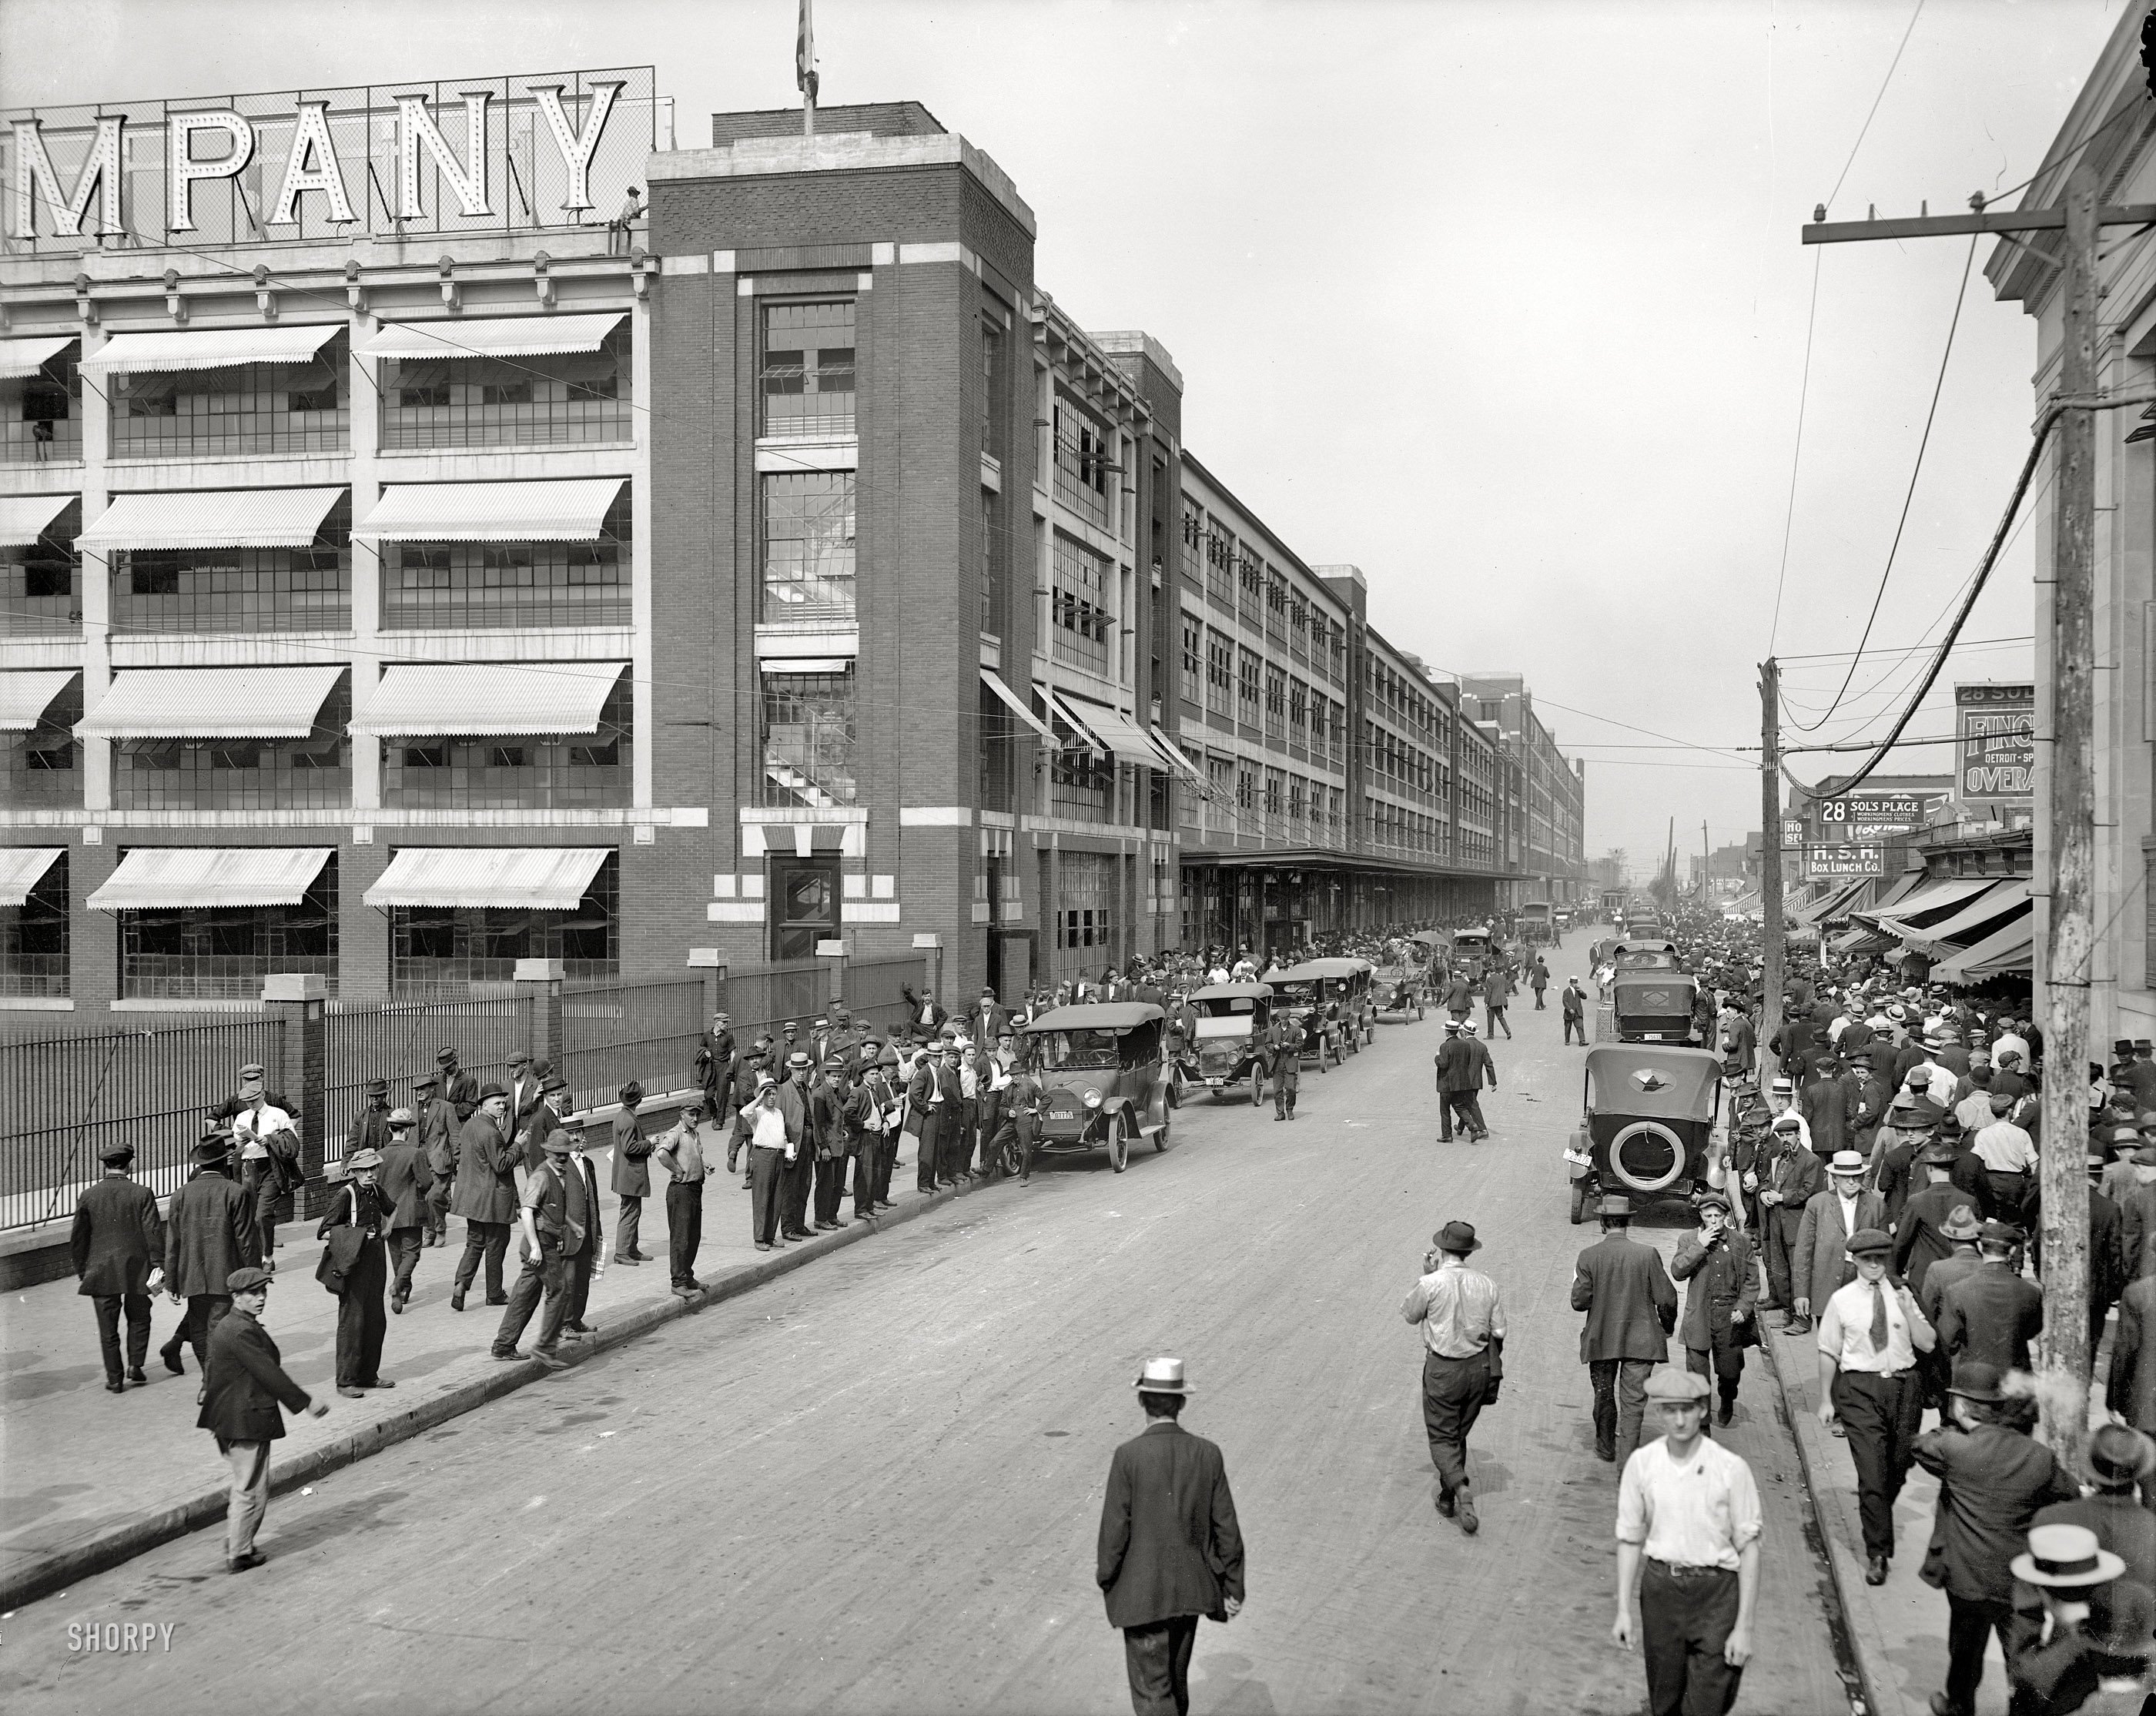 Detroit (Highland Park) circa 1916. "Four o'clock shift, Ford Motor Company." 8x10 inch dry plate glass negative, Detroit Publishing Company. View full size.